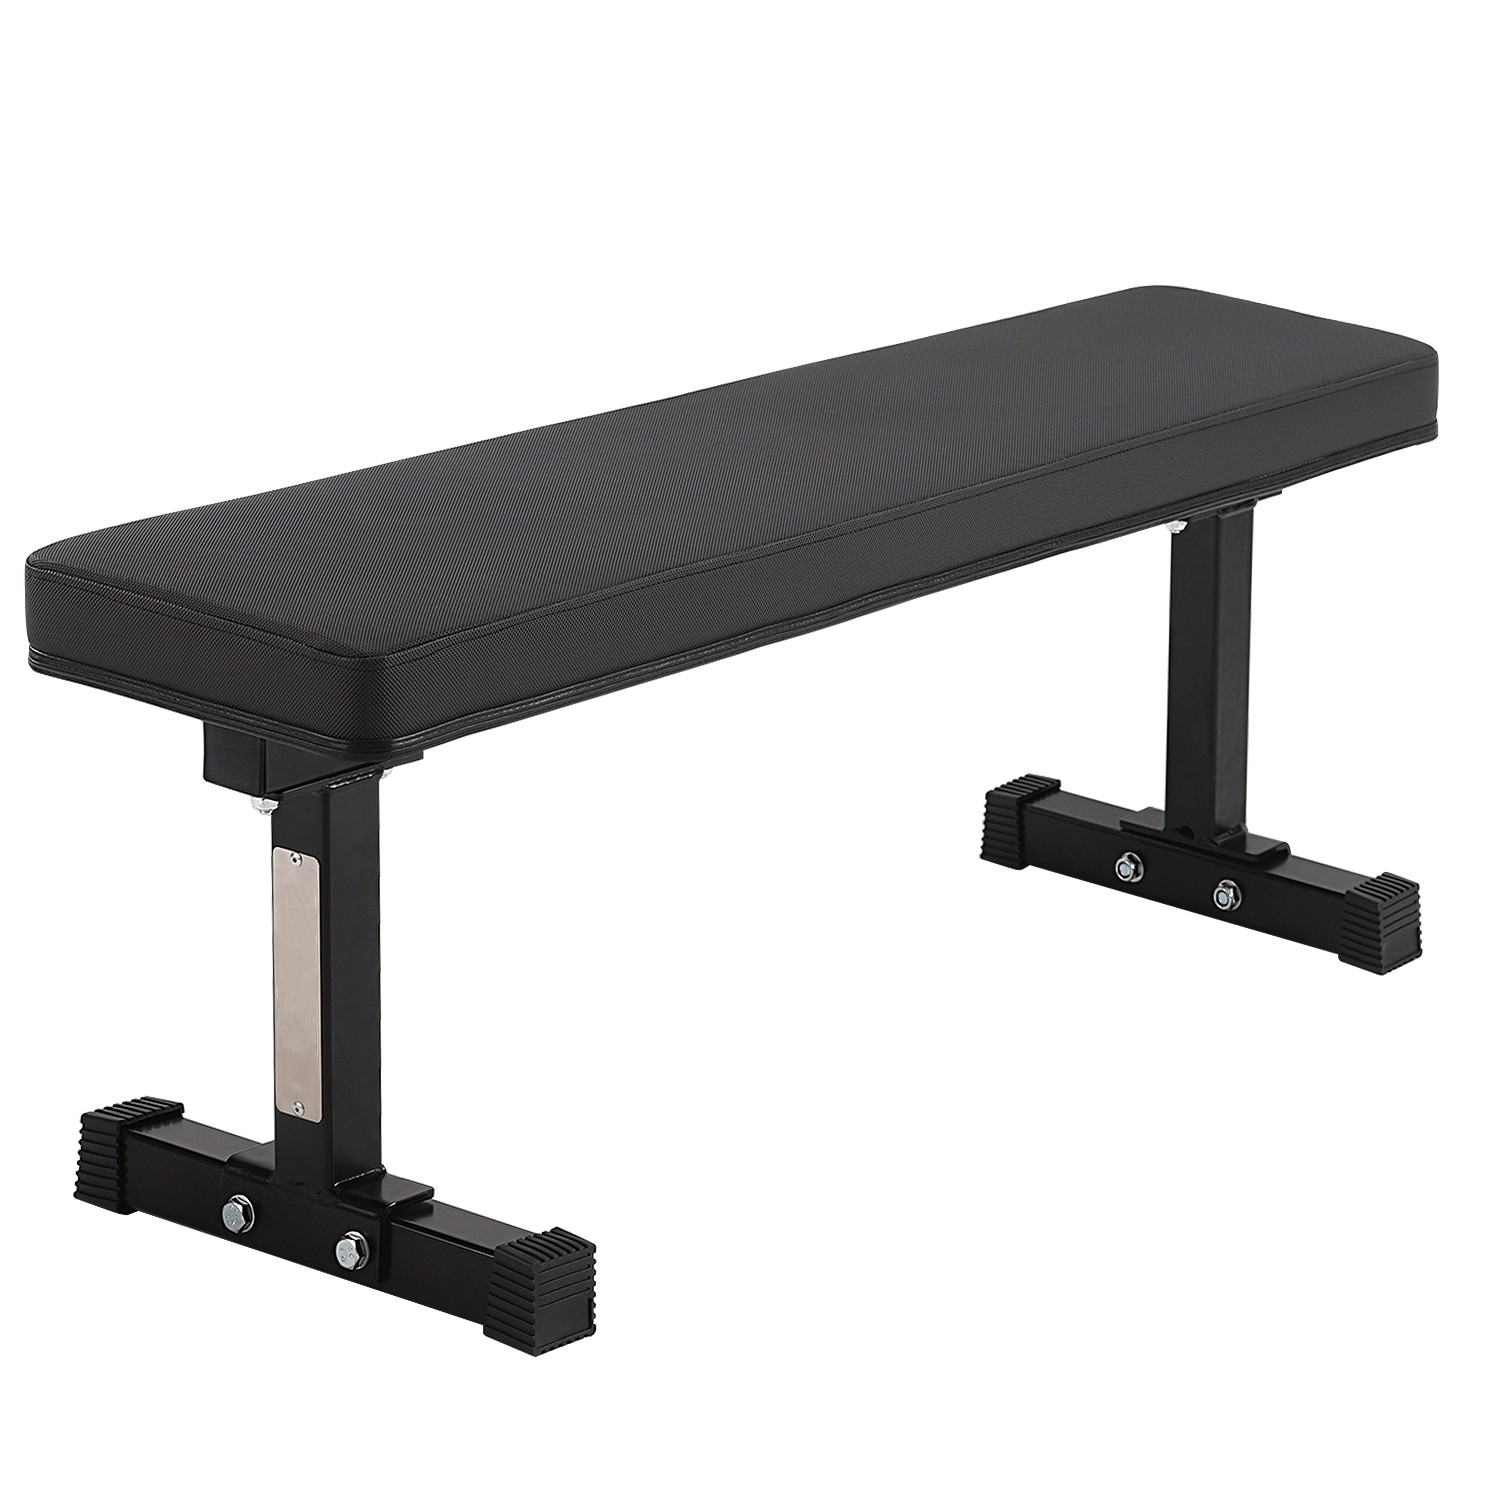 Workout Bench for Home Office Gym, Sturdy Training Benches